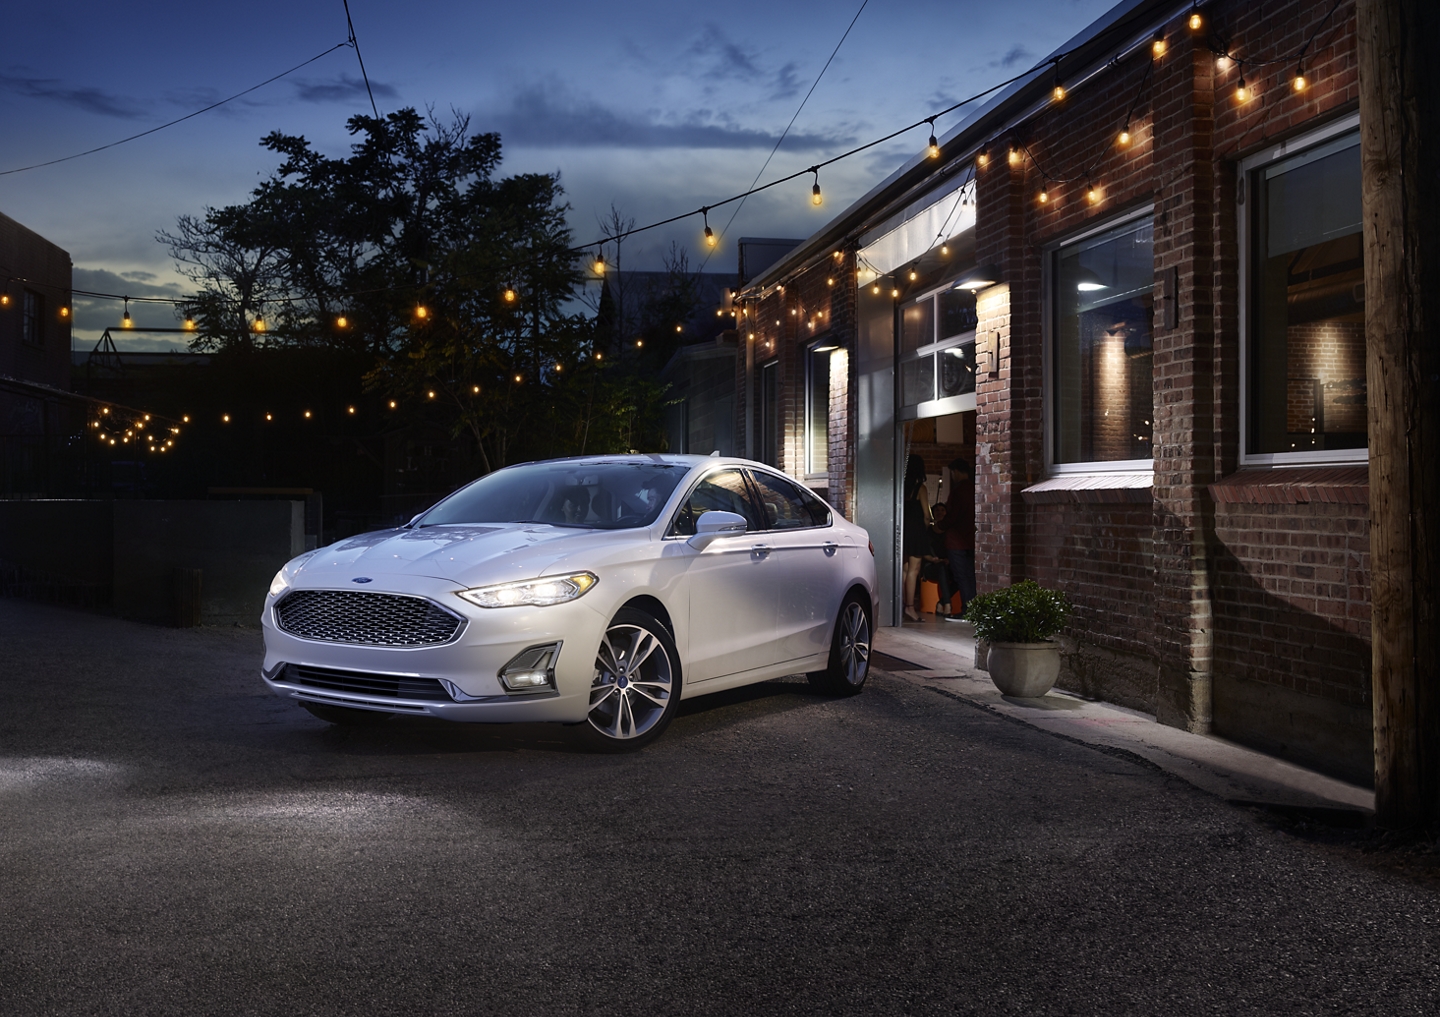 2020 Ford Fusion exterior